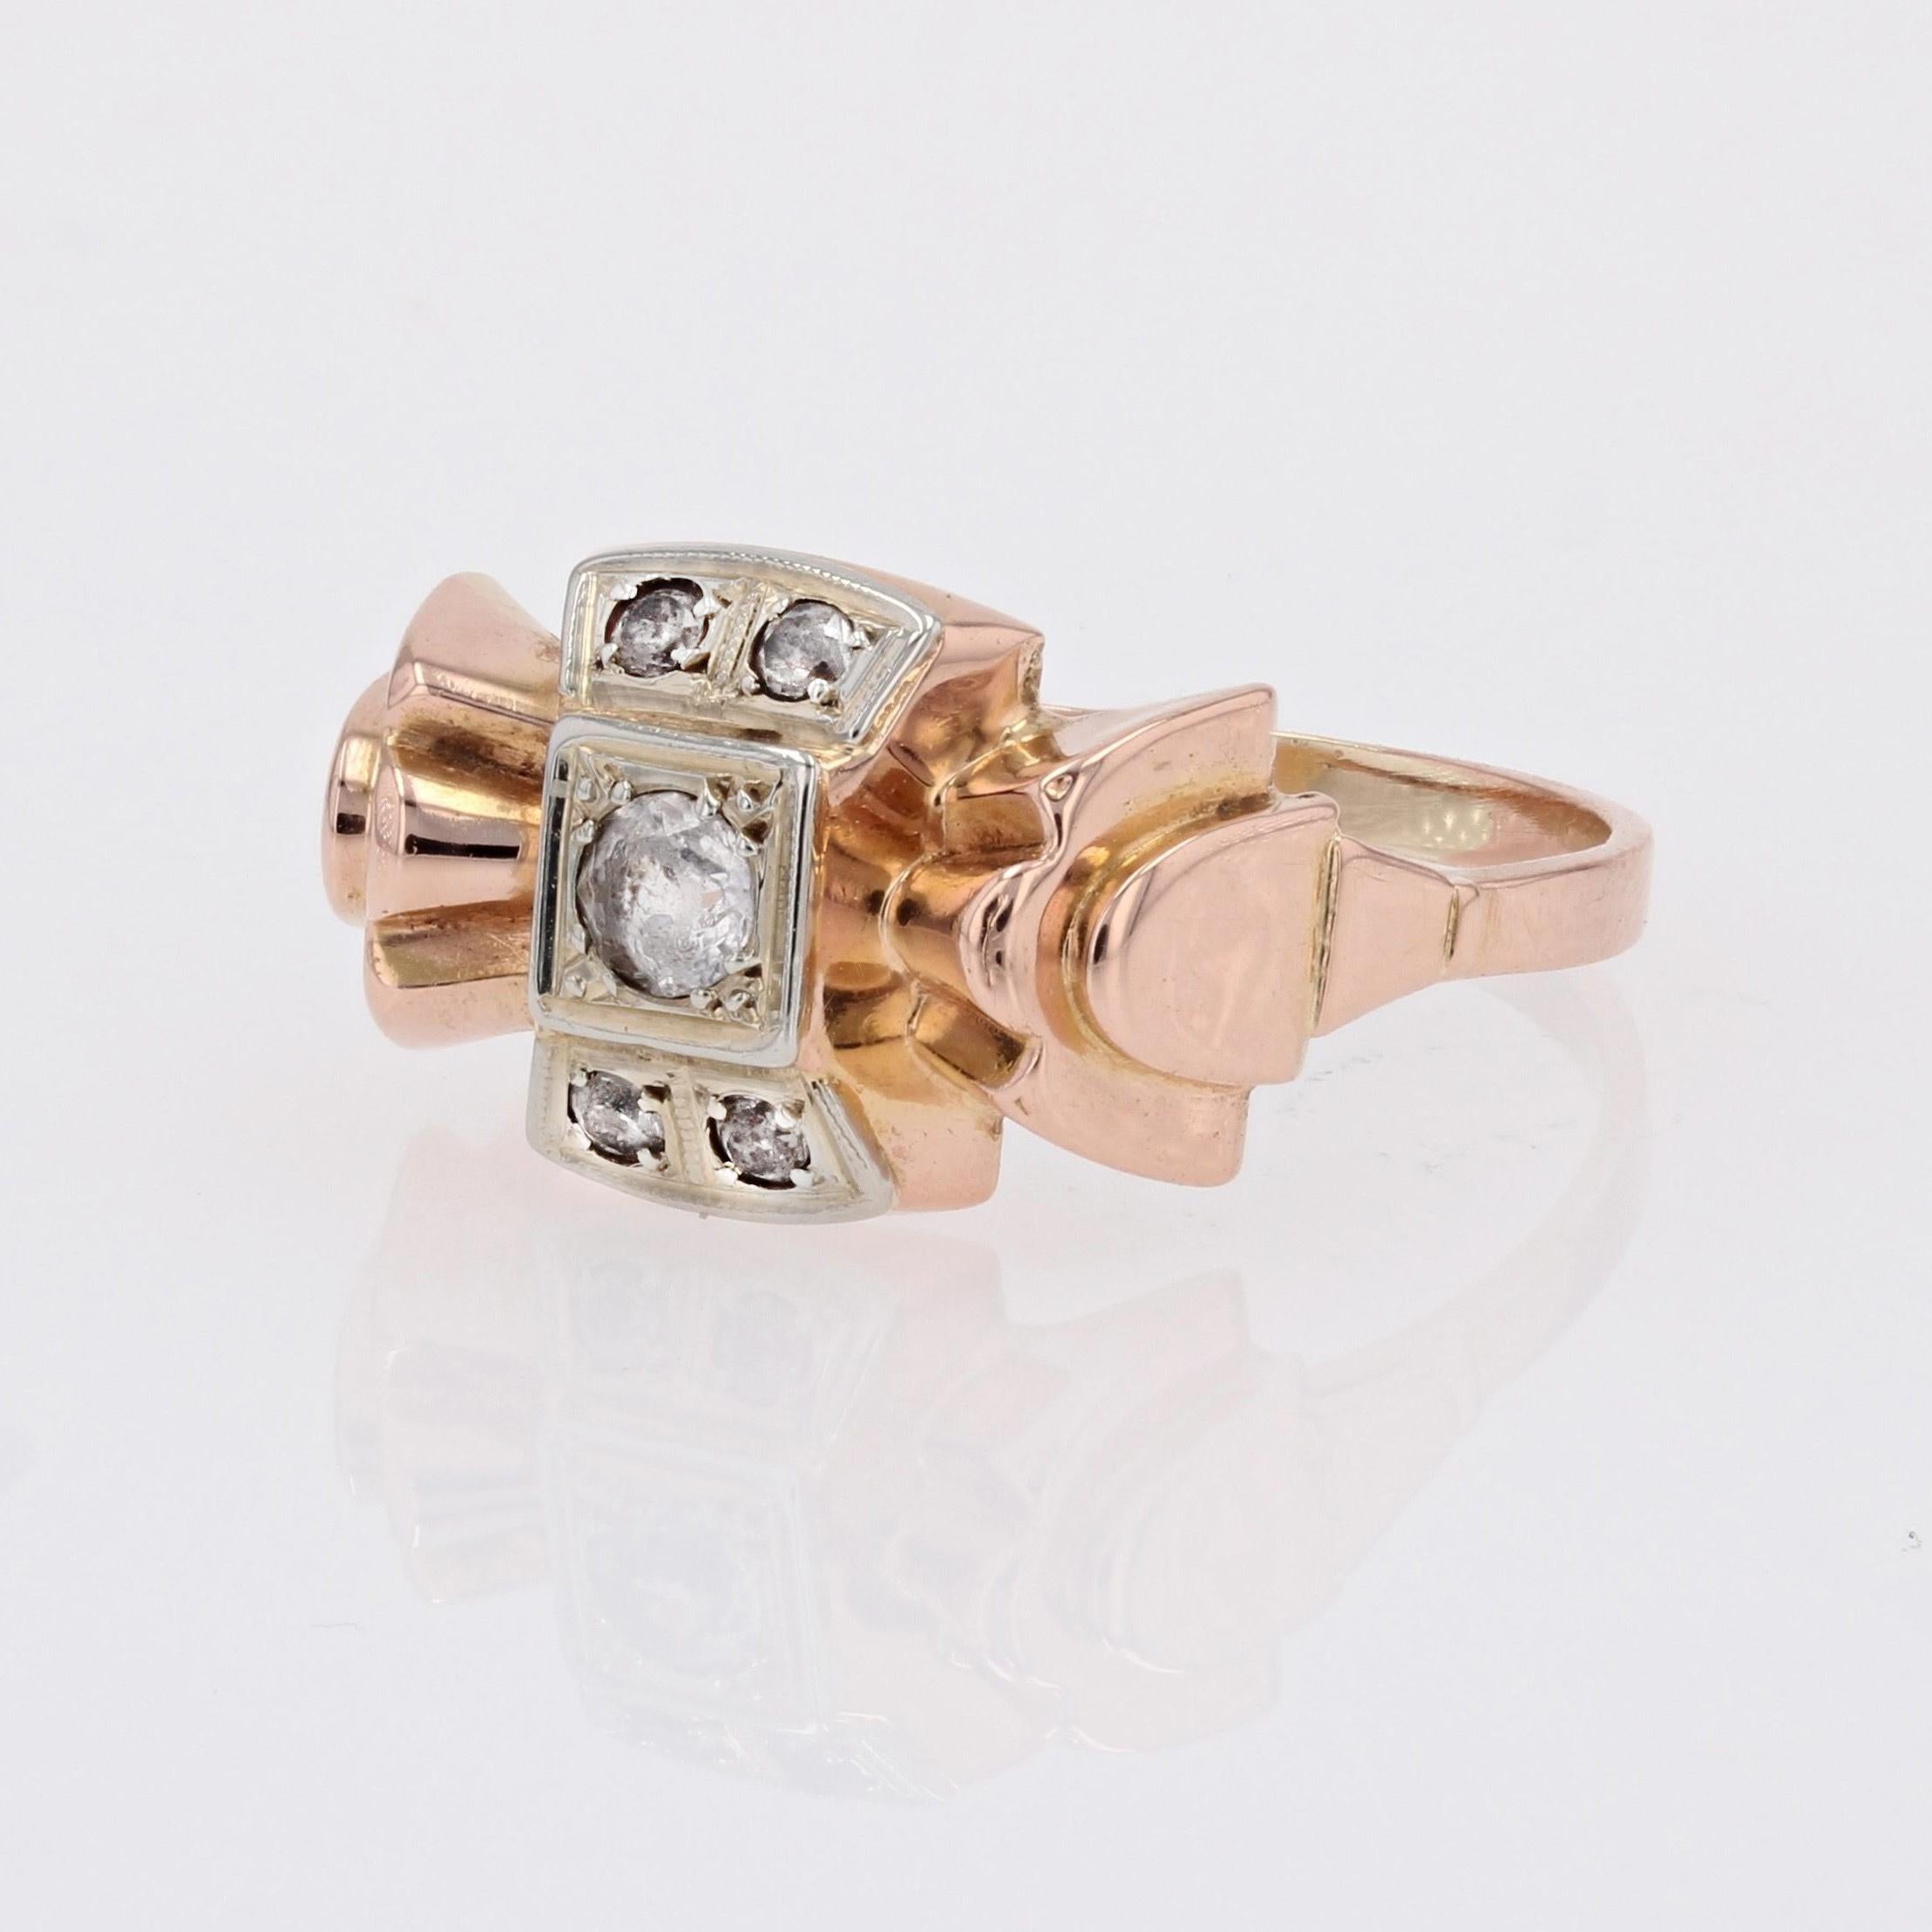 Ring in 18 karat rose gold, eagle head hallmark.
The setting of this charming retro ring forms a knot whose central motif is composed of a white sapphire accompanied at the bottom and top by 2 smaller white sapphires.
Height : 11 mm approximately,